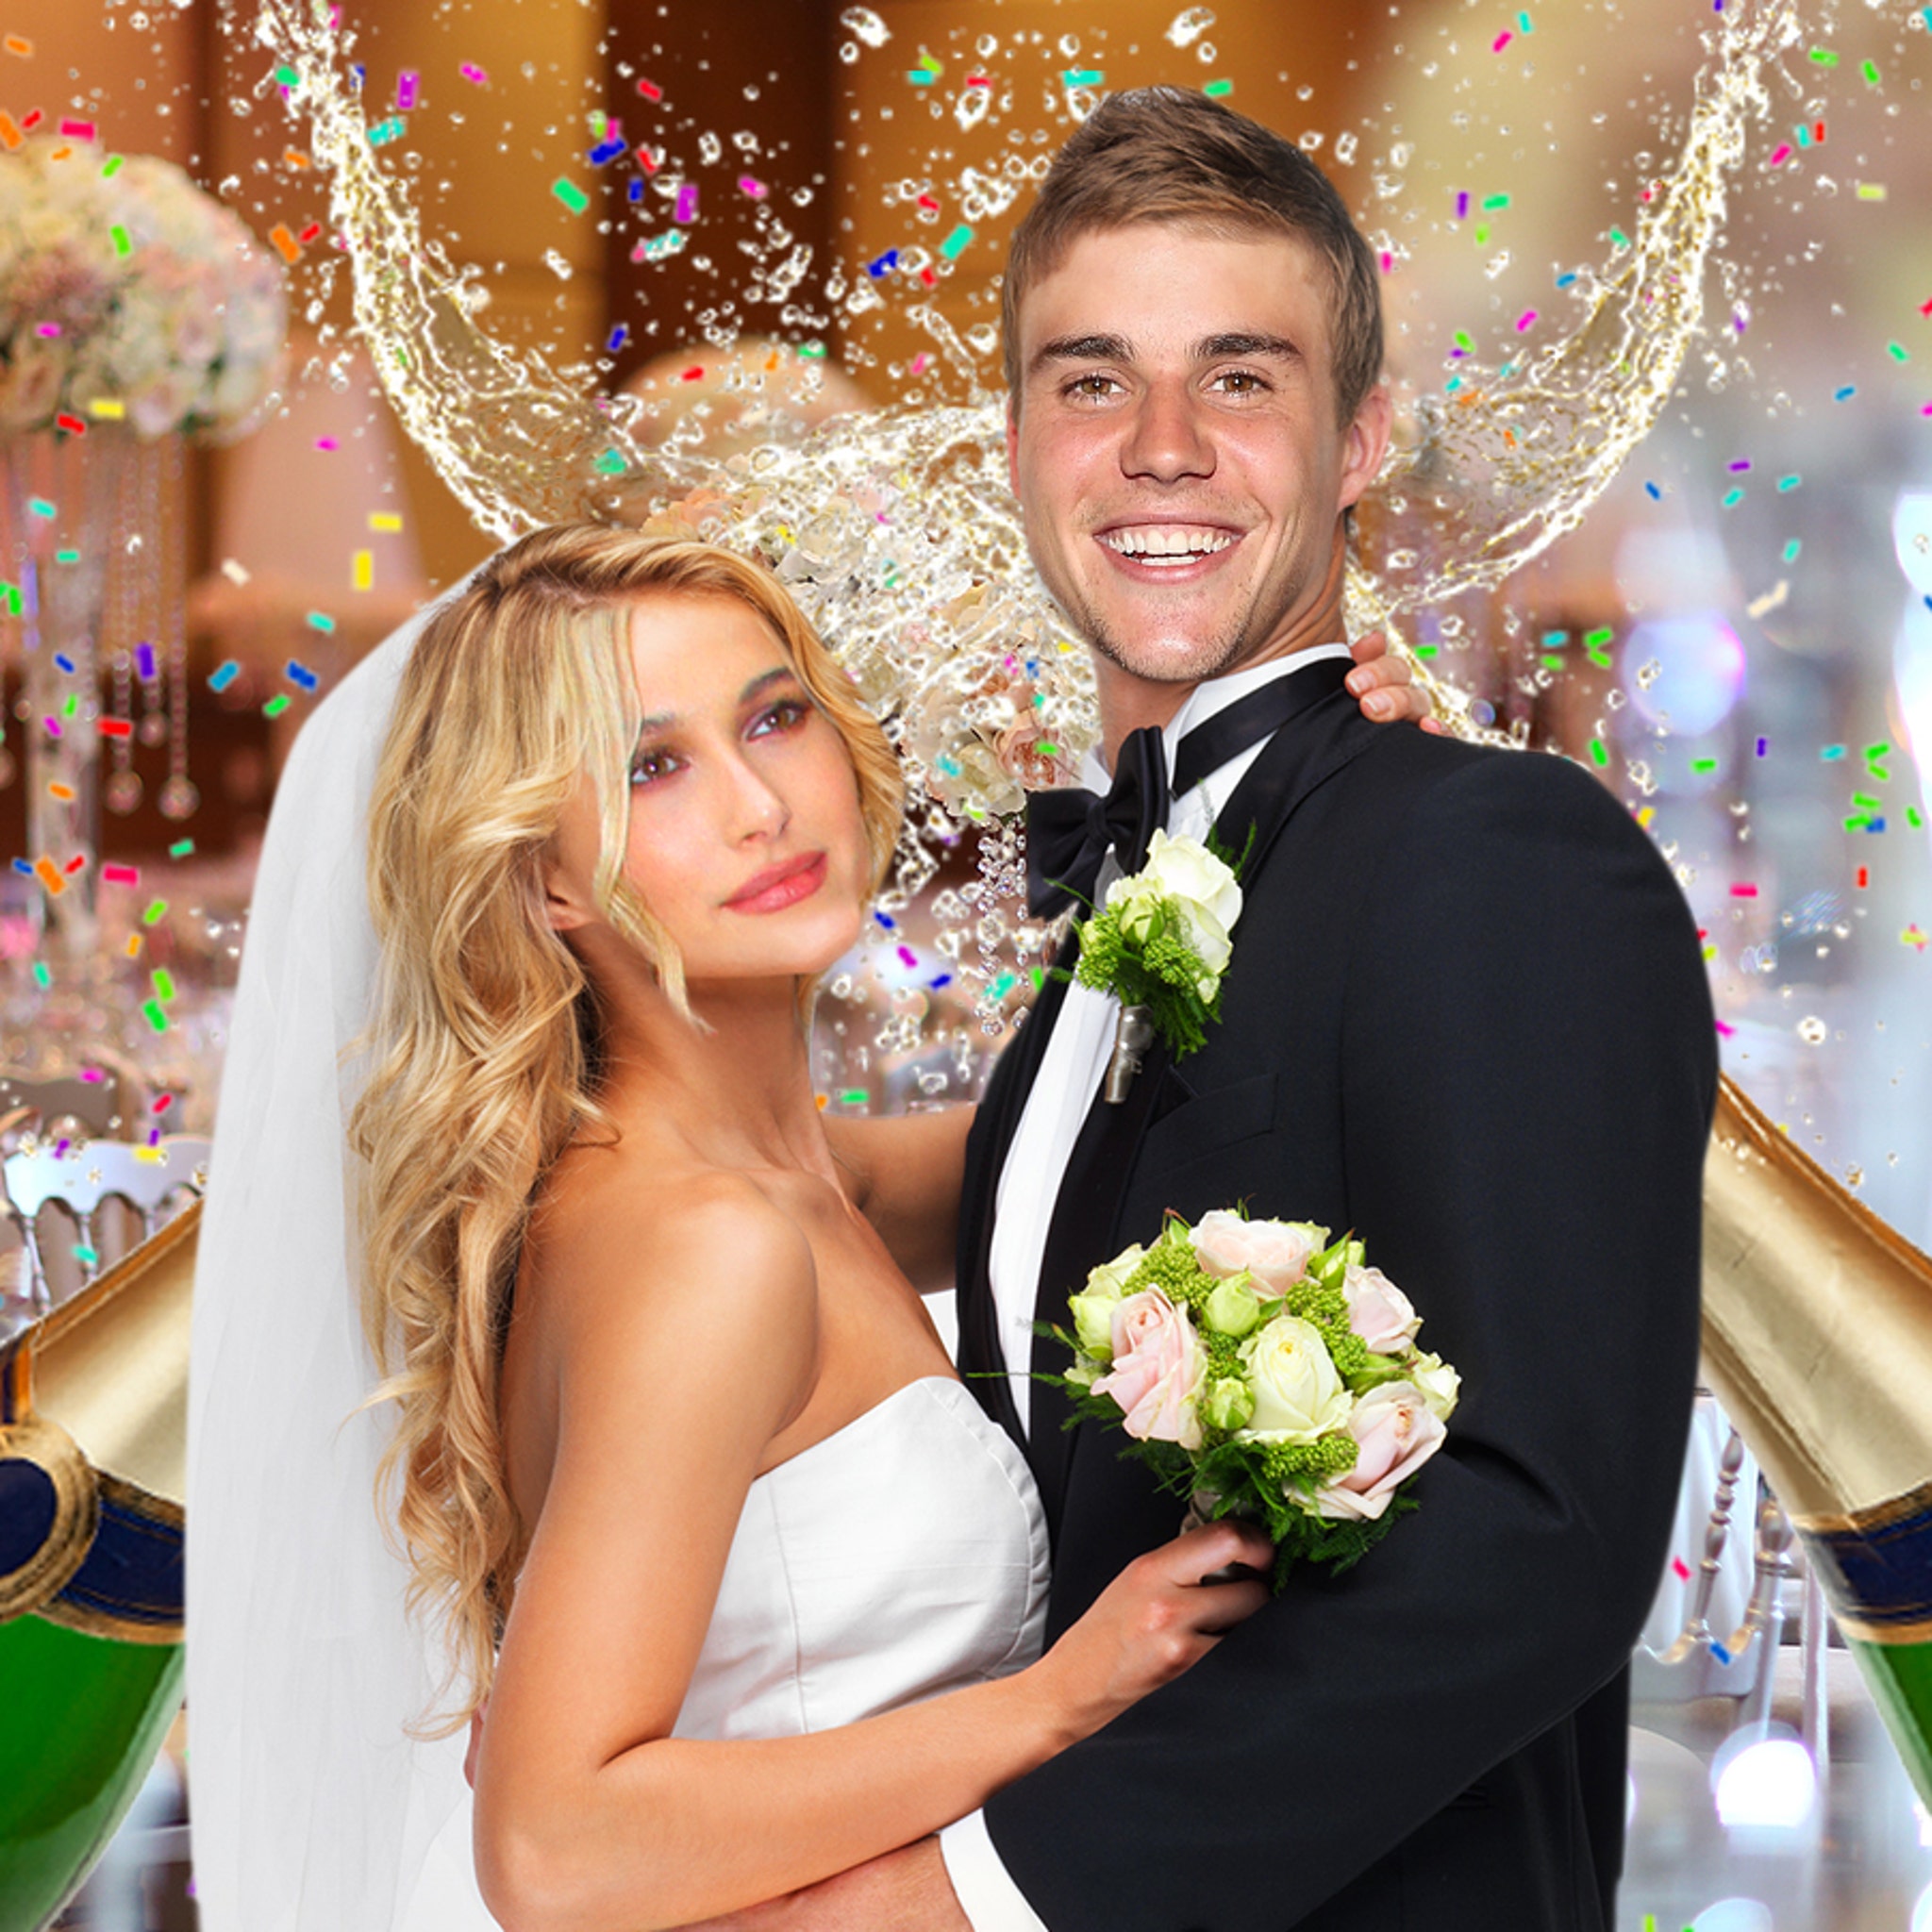 Justin and Hailey Bieber's wedding: All the information we know so